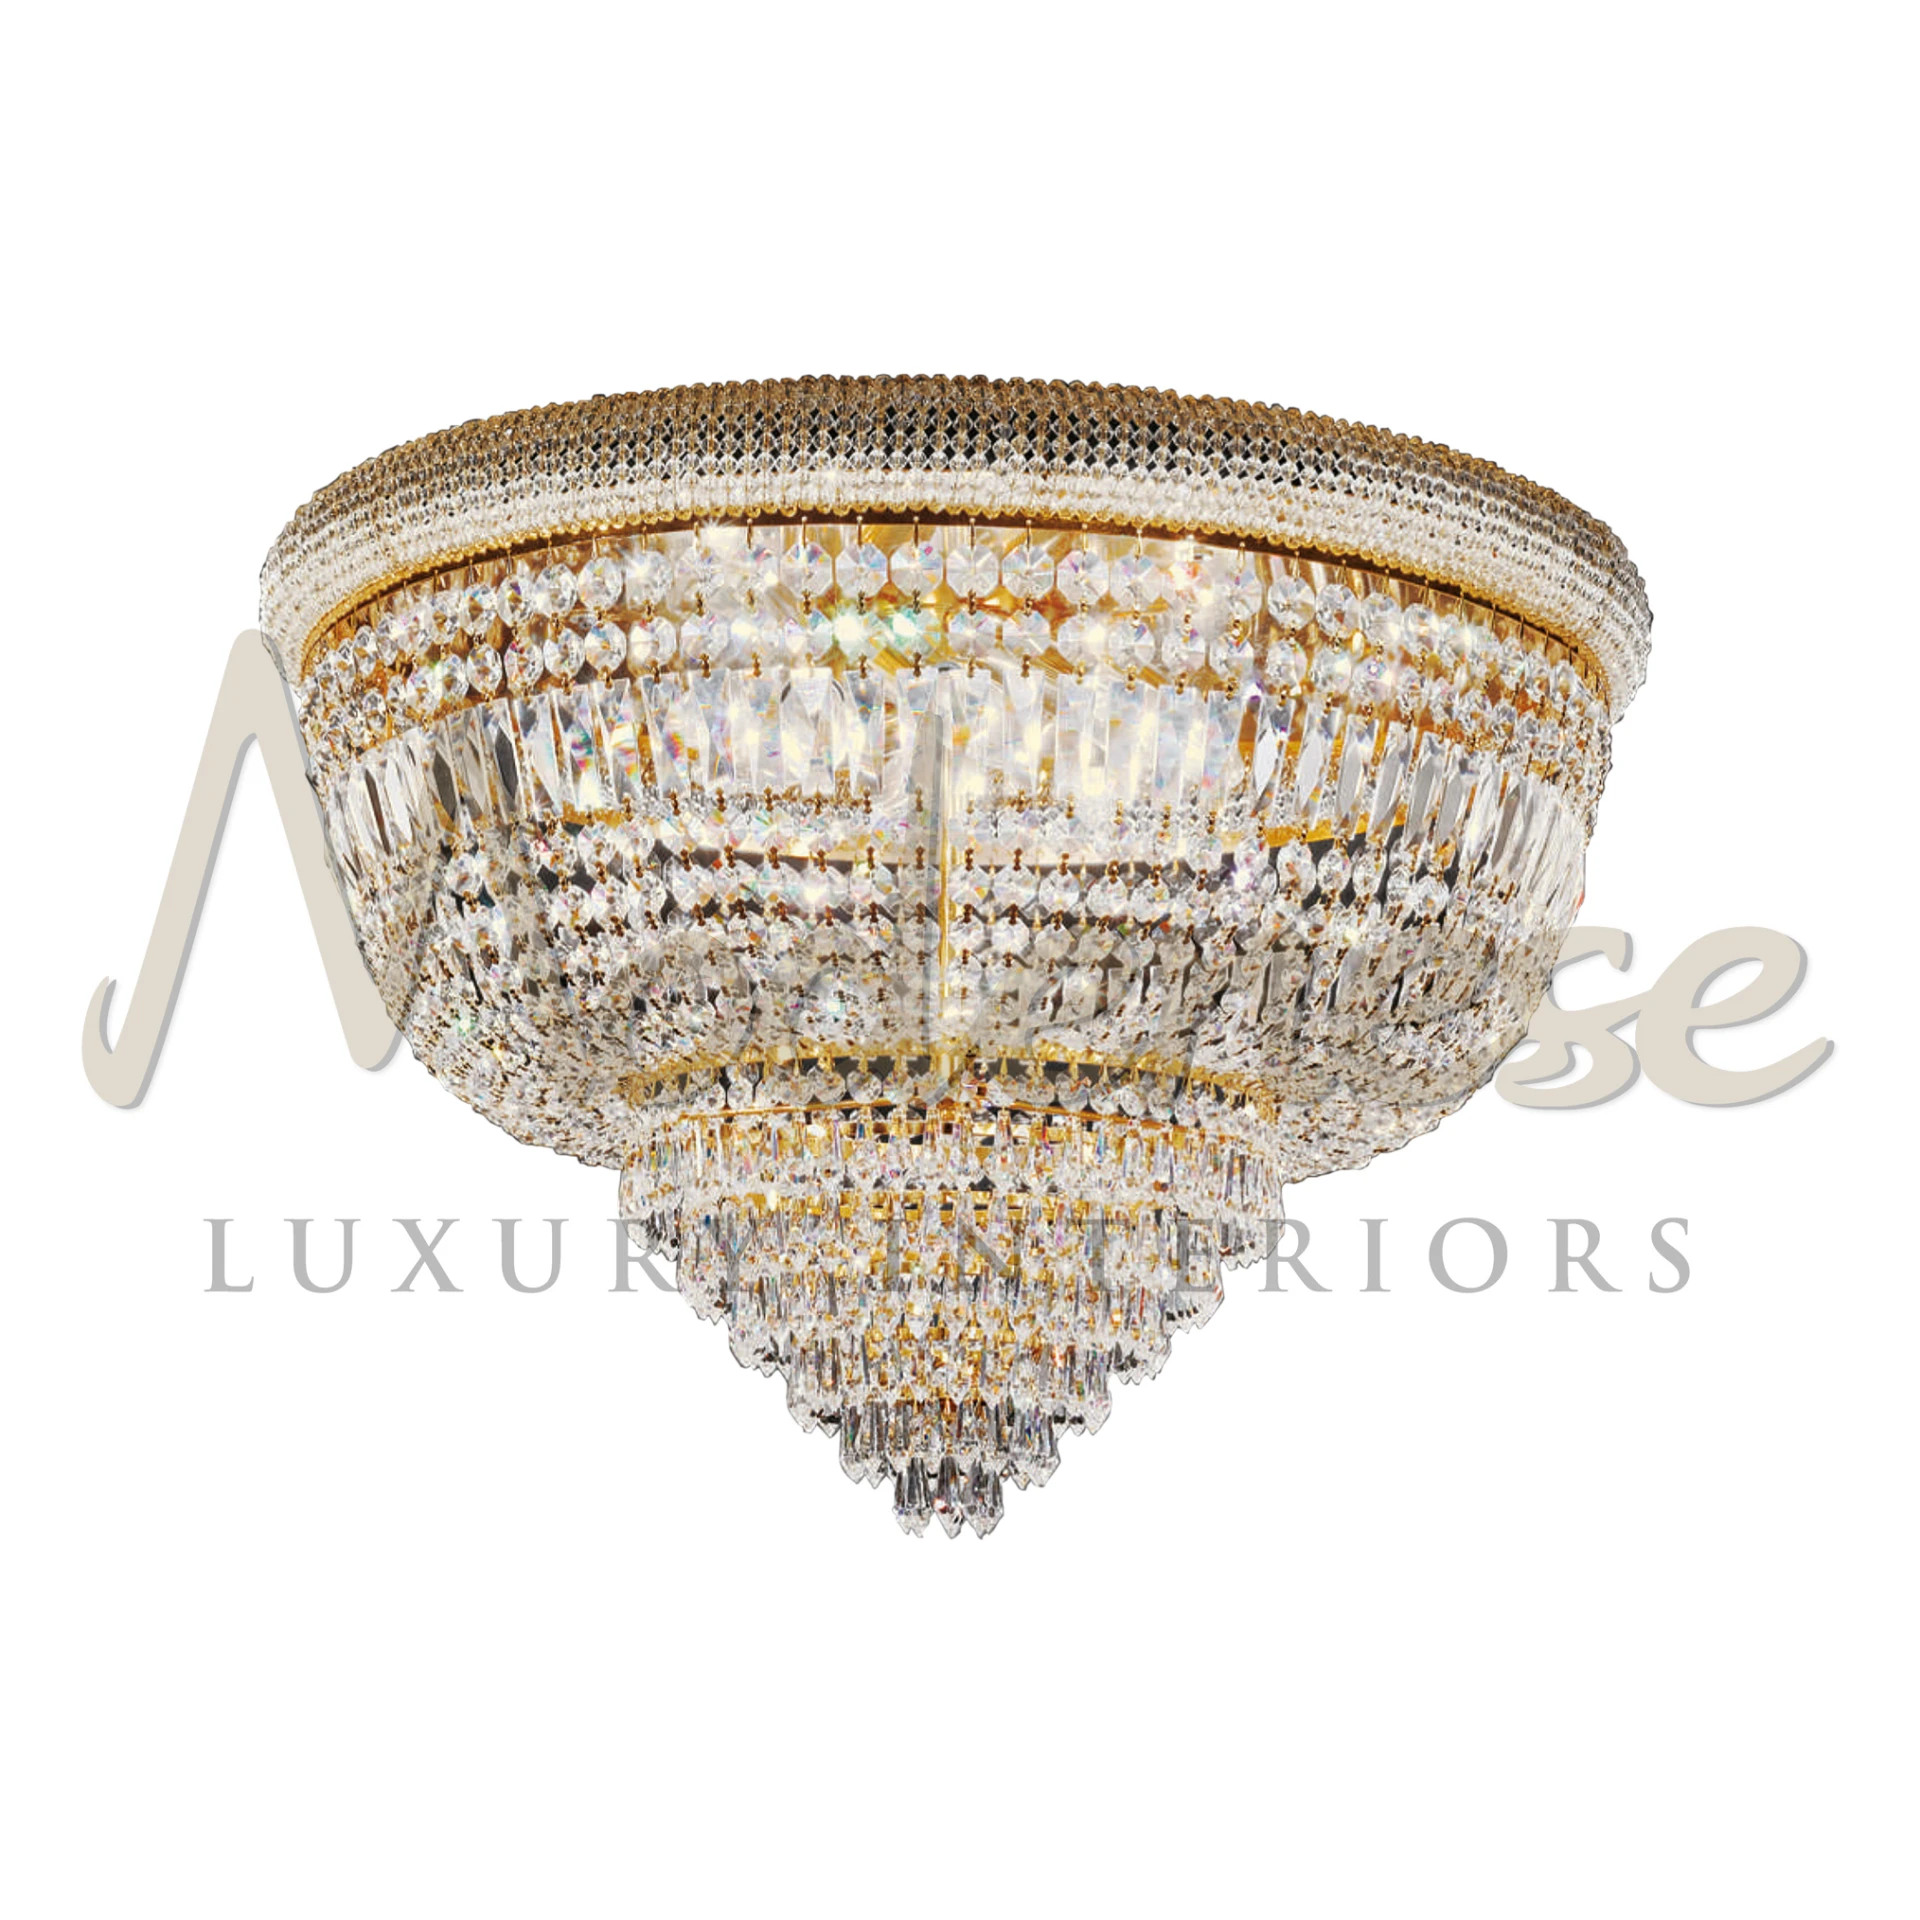 Luxury Bright Ceiling Italian Lamp with dazzling crystals and fancy gold details.